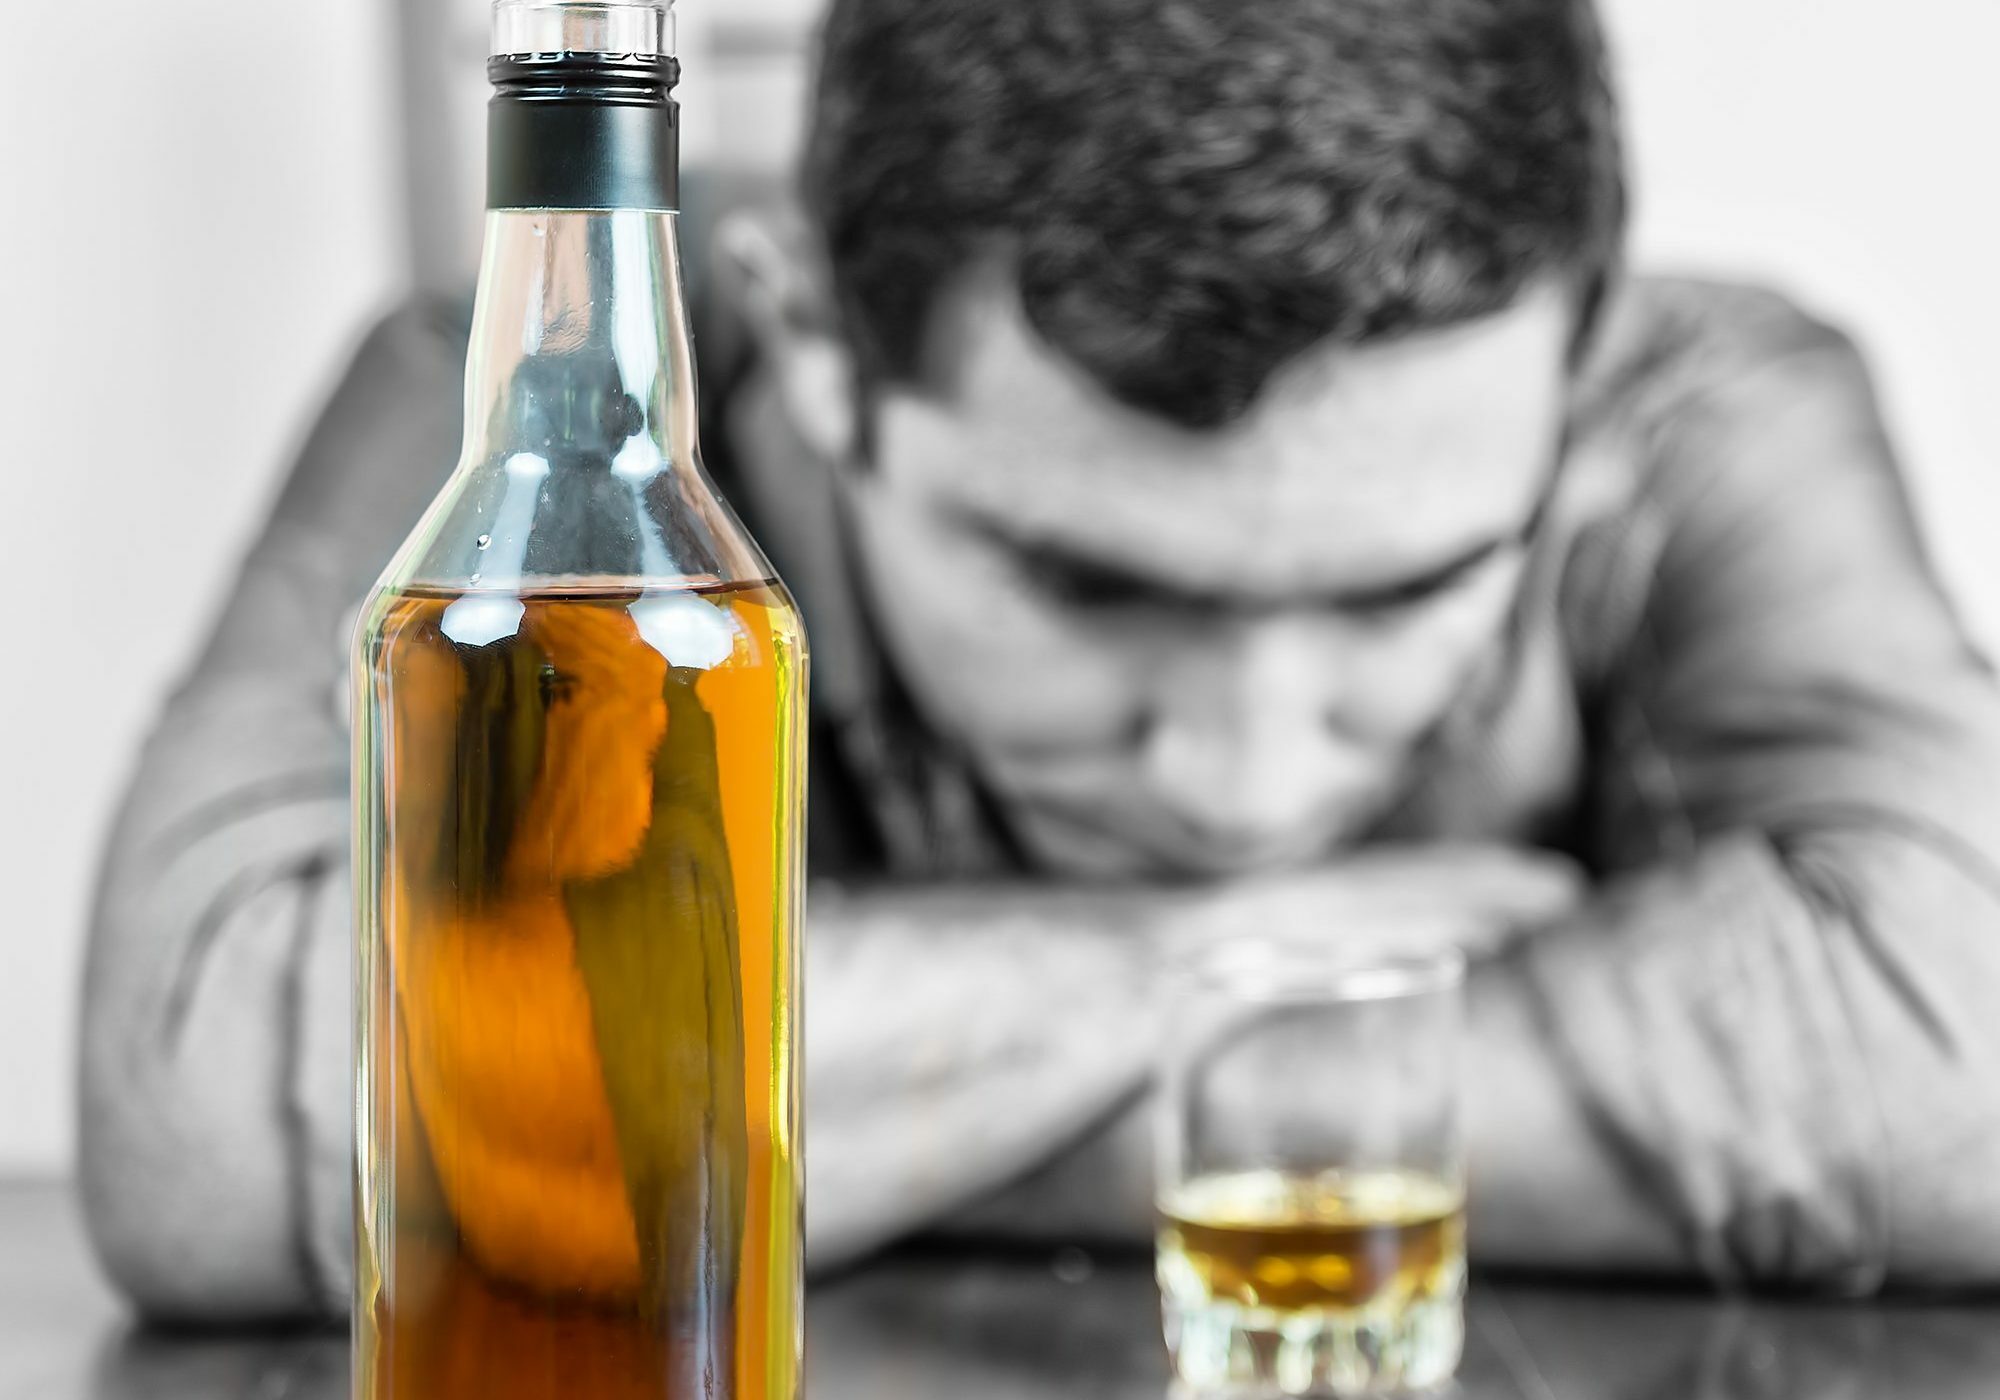 Whisky bottle with an out of focus drunk man in the background (only the bottle and the glass have color)